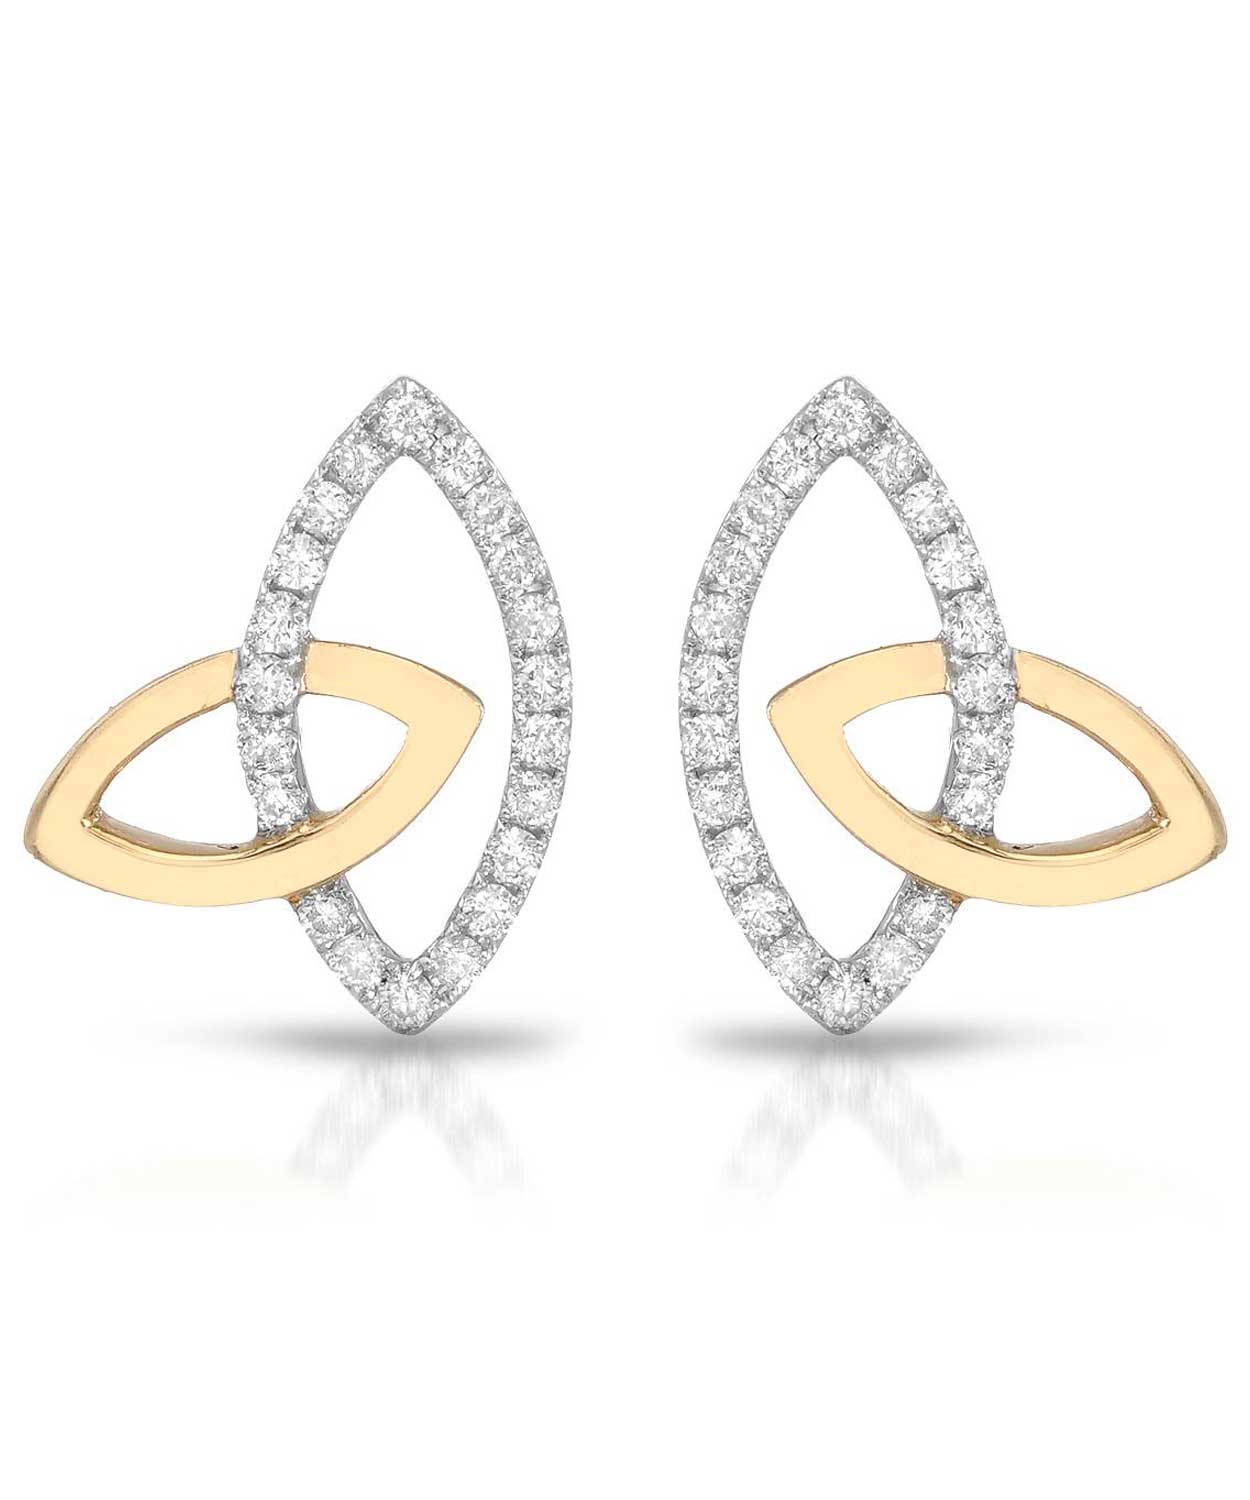 0.27 ctw Diamond 14k Two-Tone Gold Marquise Earrings View 1